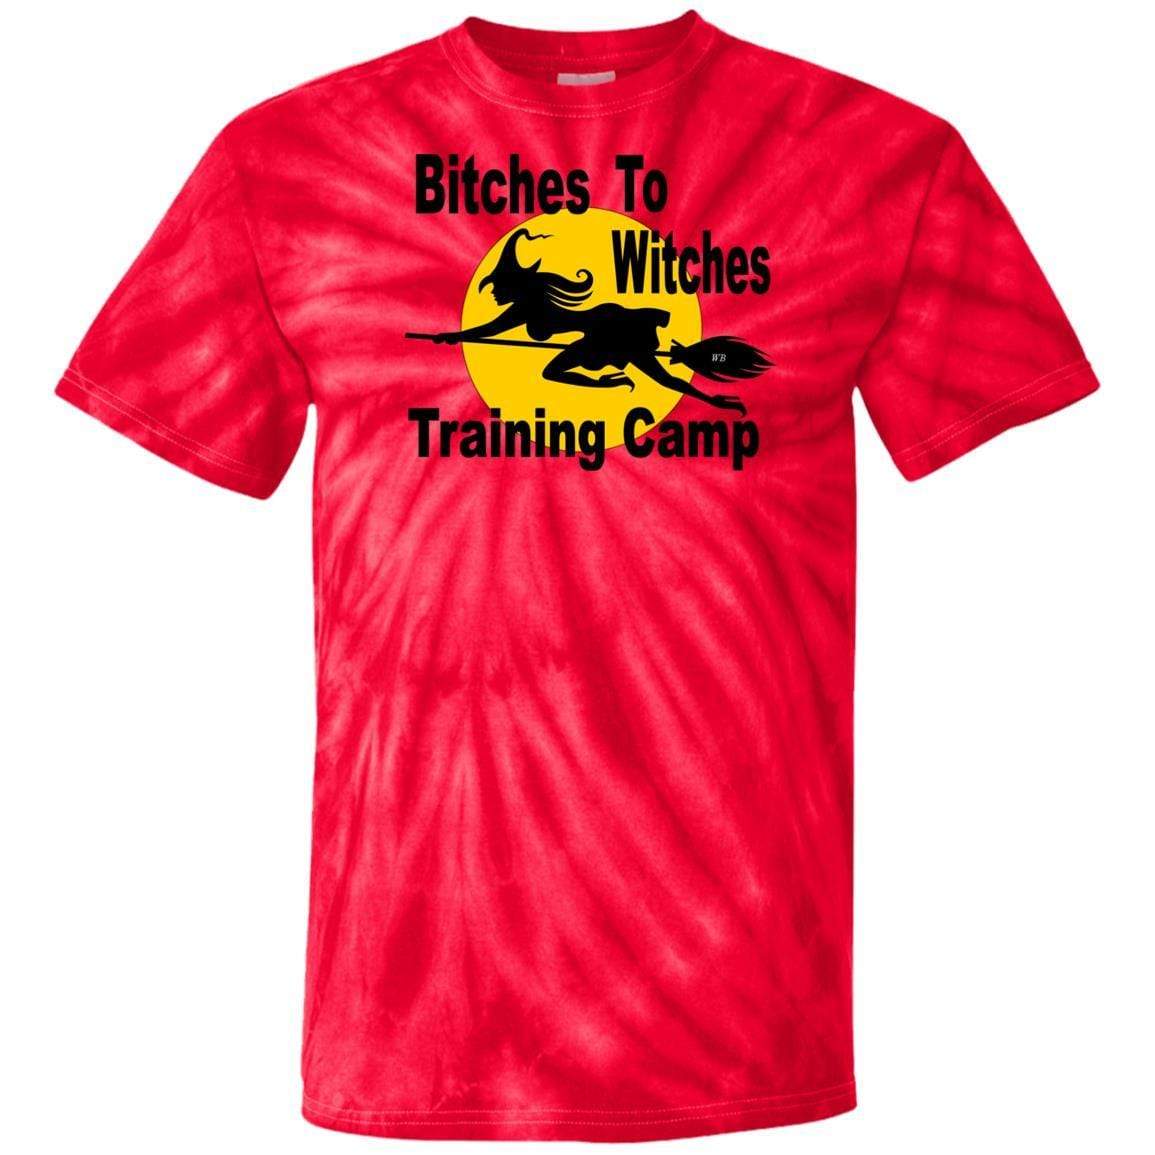 T-Shirts SpiderRed / S WineyBitches.Co "Bitches To Witches Training Camp" - 100% Cotton Tie Dye T-Shirt WineyBitchesCo